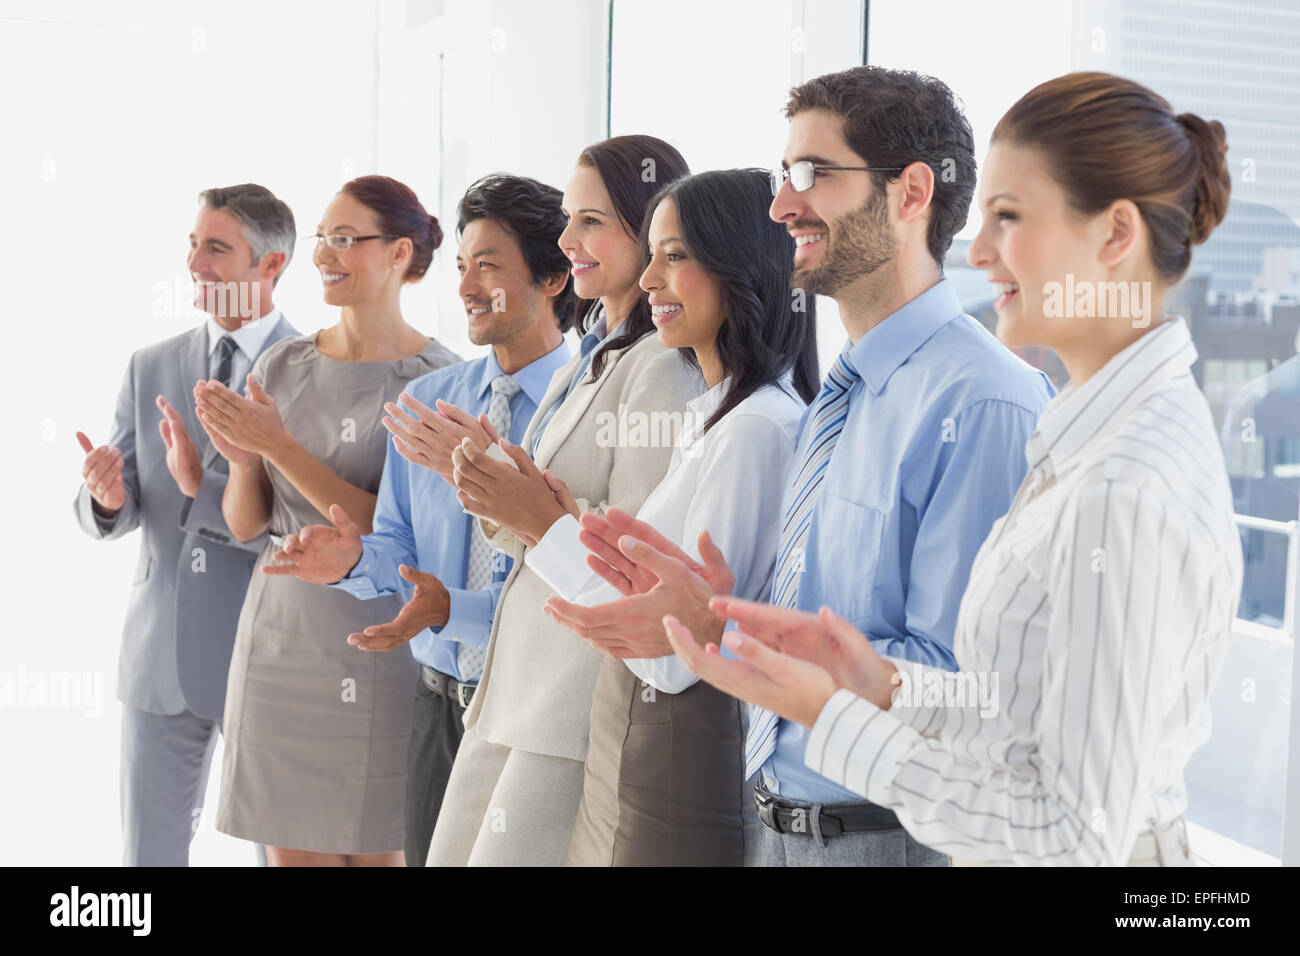 Applauding workers smiling and cheerful Stock Photo